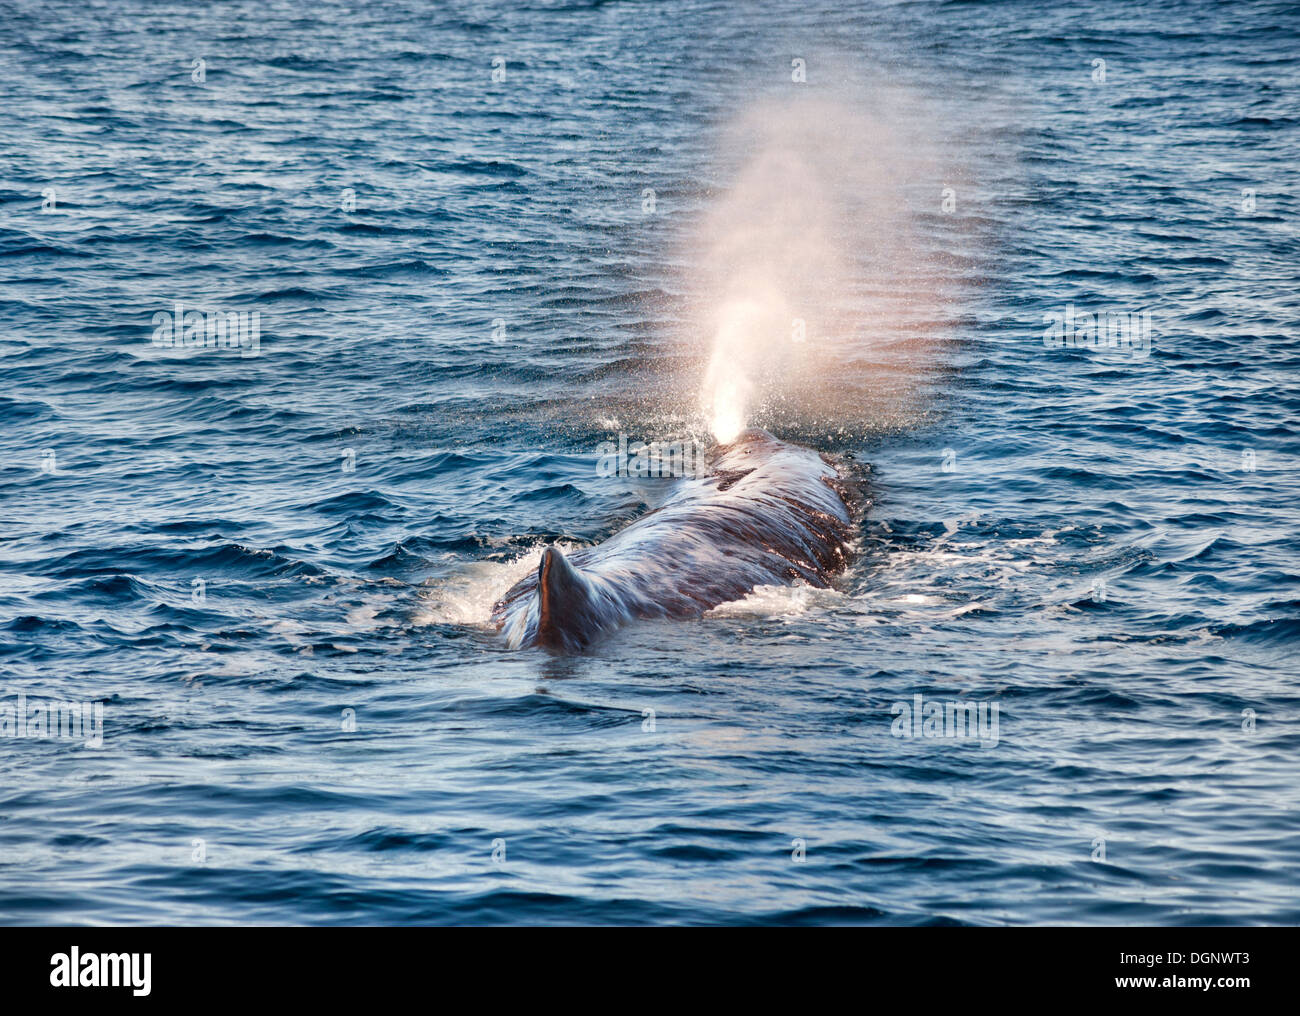 Kaikoura, New Zealand. Locally living Sperm Whale nicknamed 'Manu' surfaced and blowing rainbow jet of water. Stock Photo